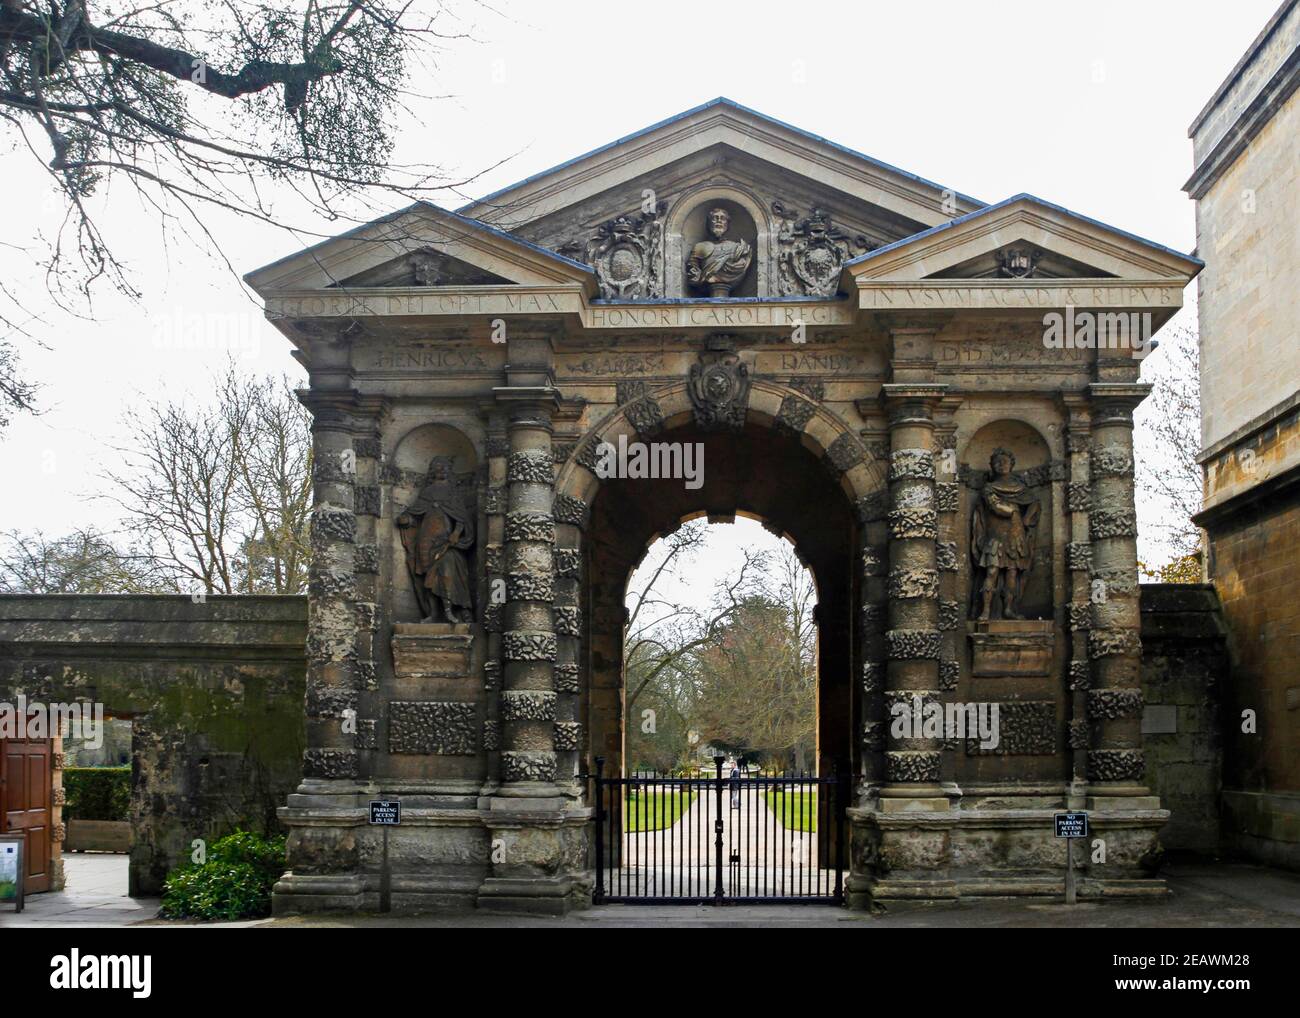 The Danby Gateway, entrance to The Botanic Garden in Oxford, UK. Oldest botanical garden in Britain with entrance built in 1633 Stock Photo